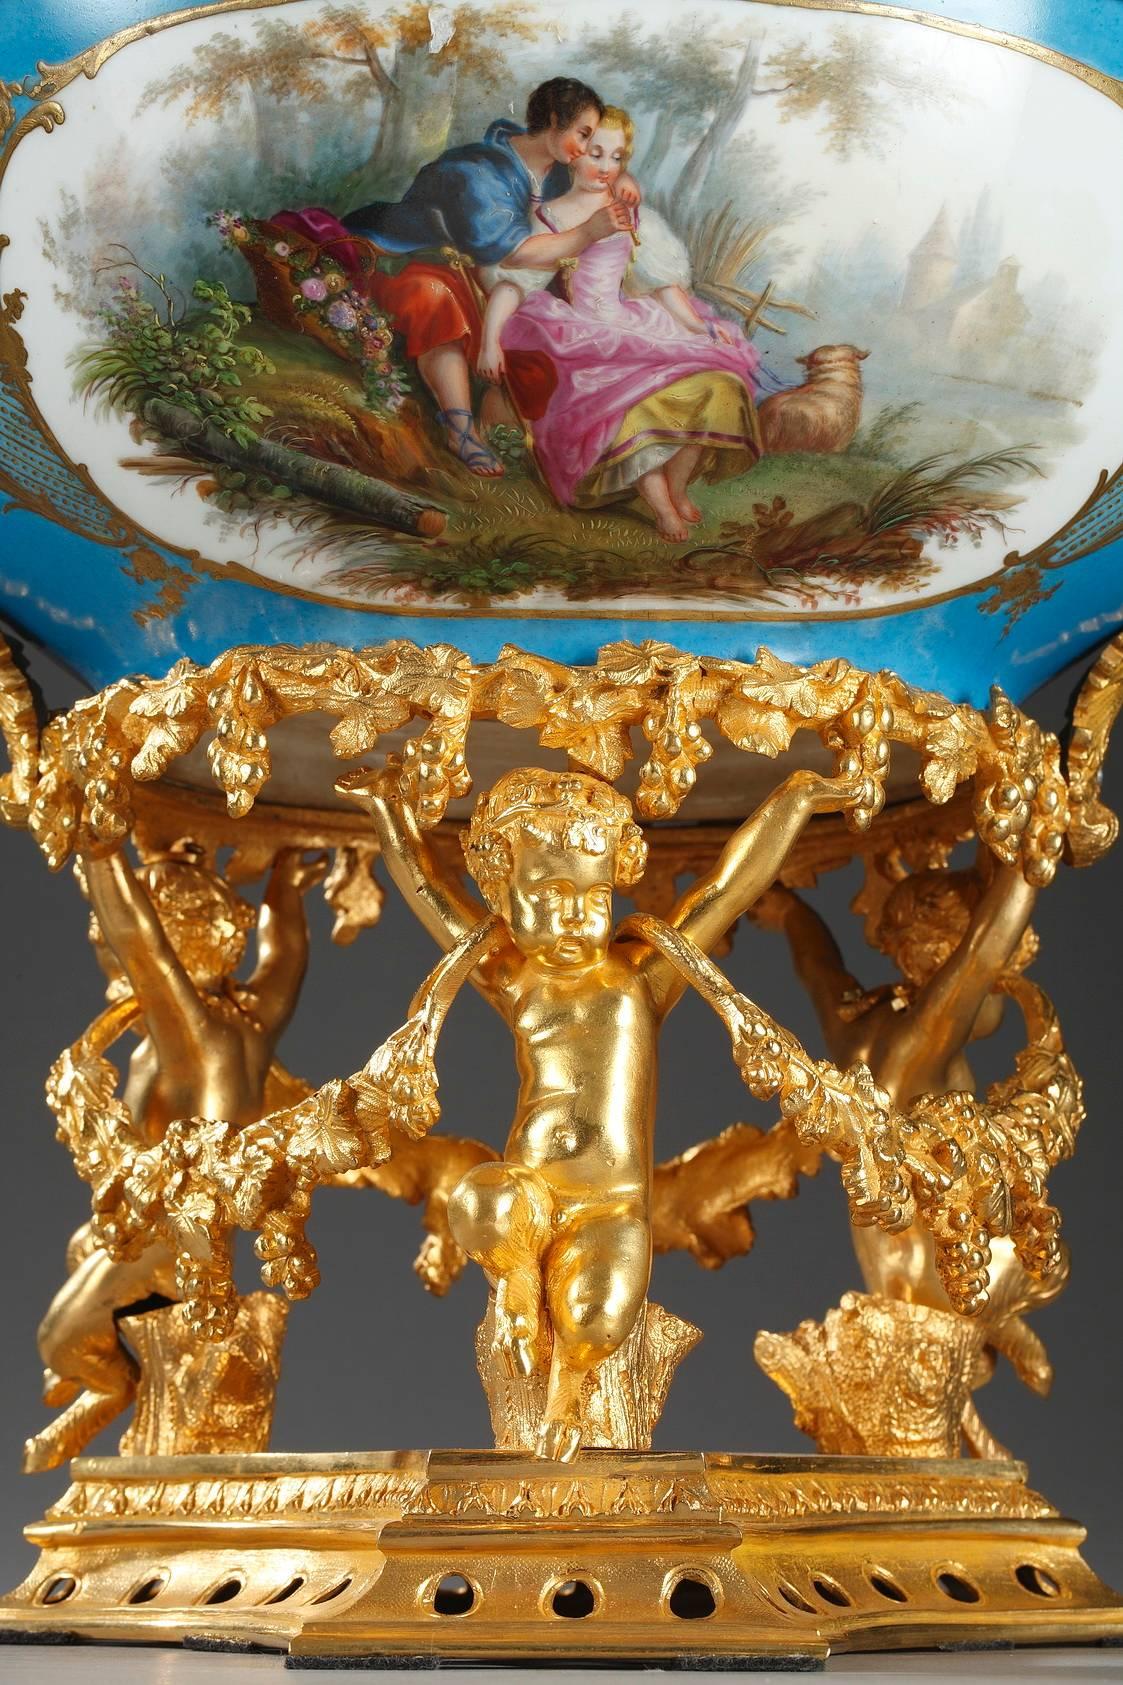 Large Pedestal Bowl in Porcelain and Gilt Bronze, 19th Century 3